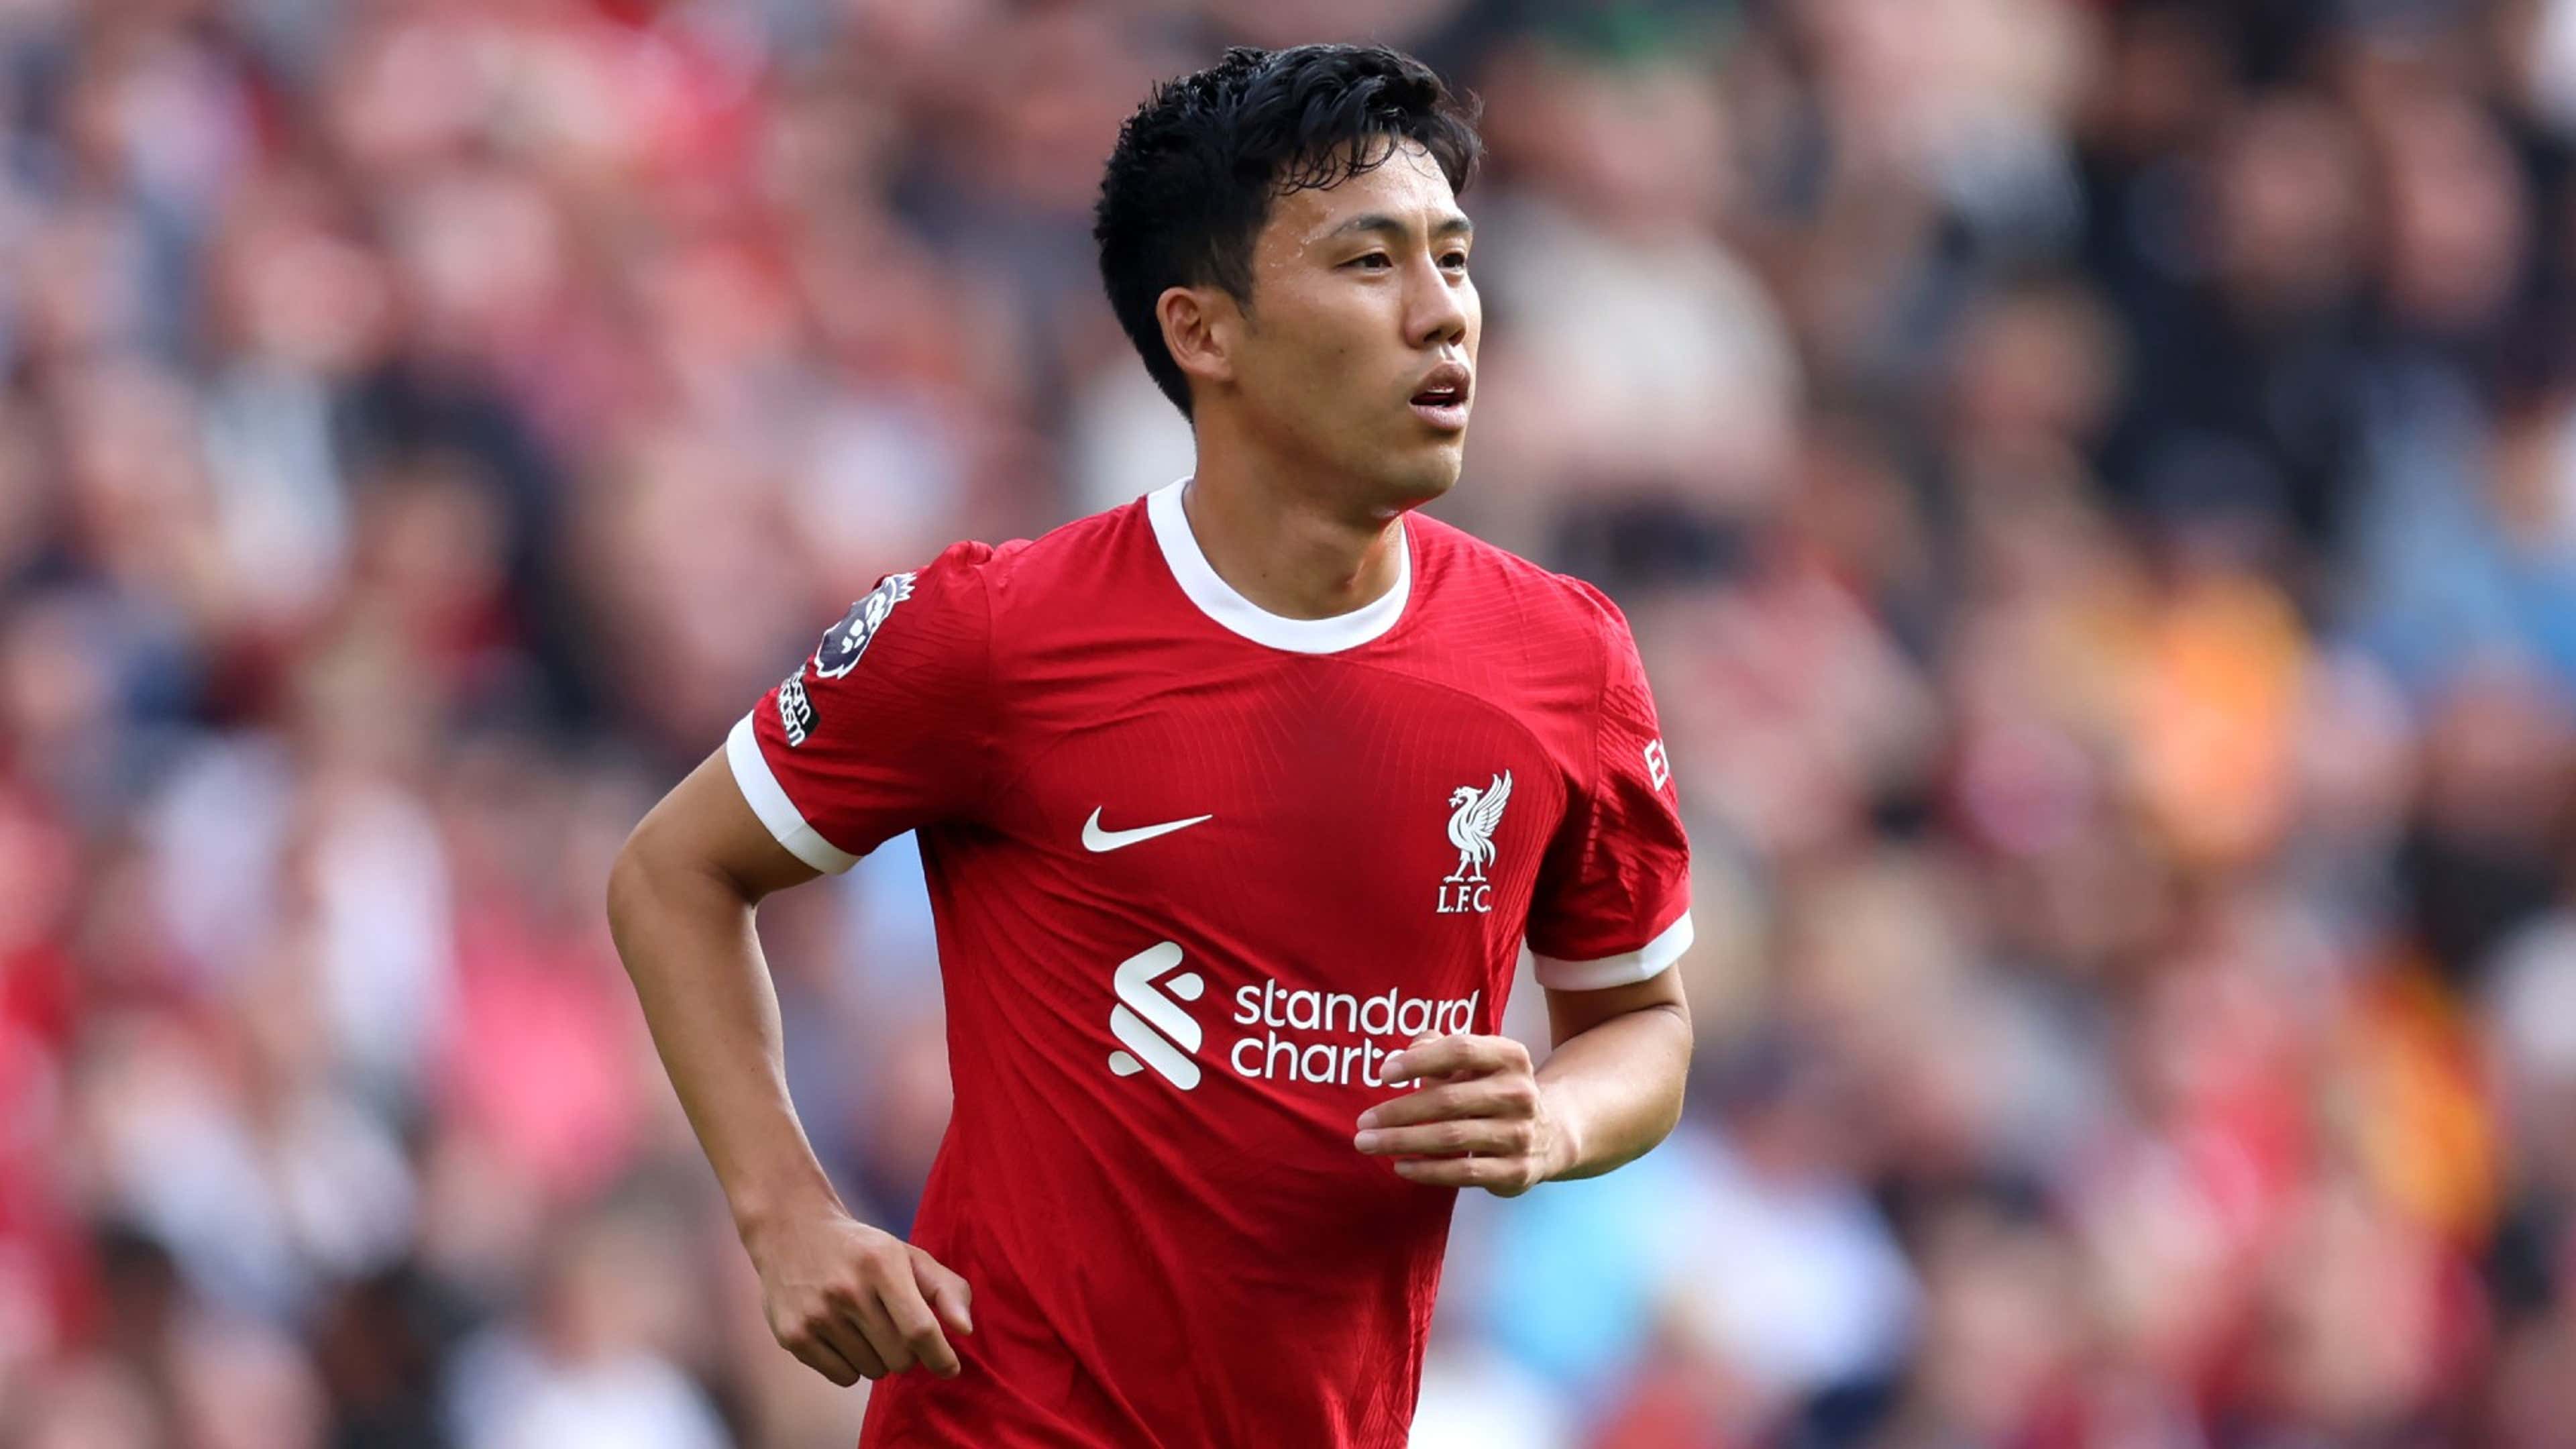 It was crazy!' - Wataru Endo reflects on Liverpool debut after whirlwind  transfer from Stuttgart | Goal.com United Arab Emirates